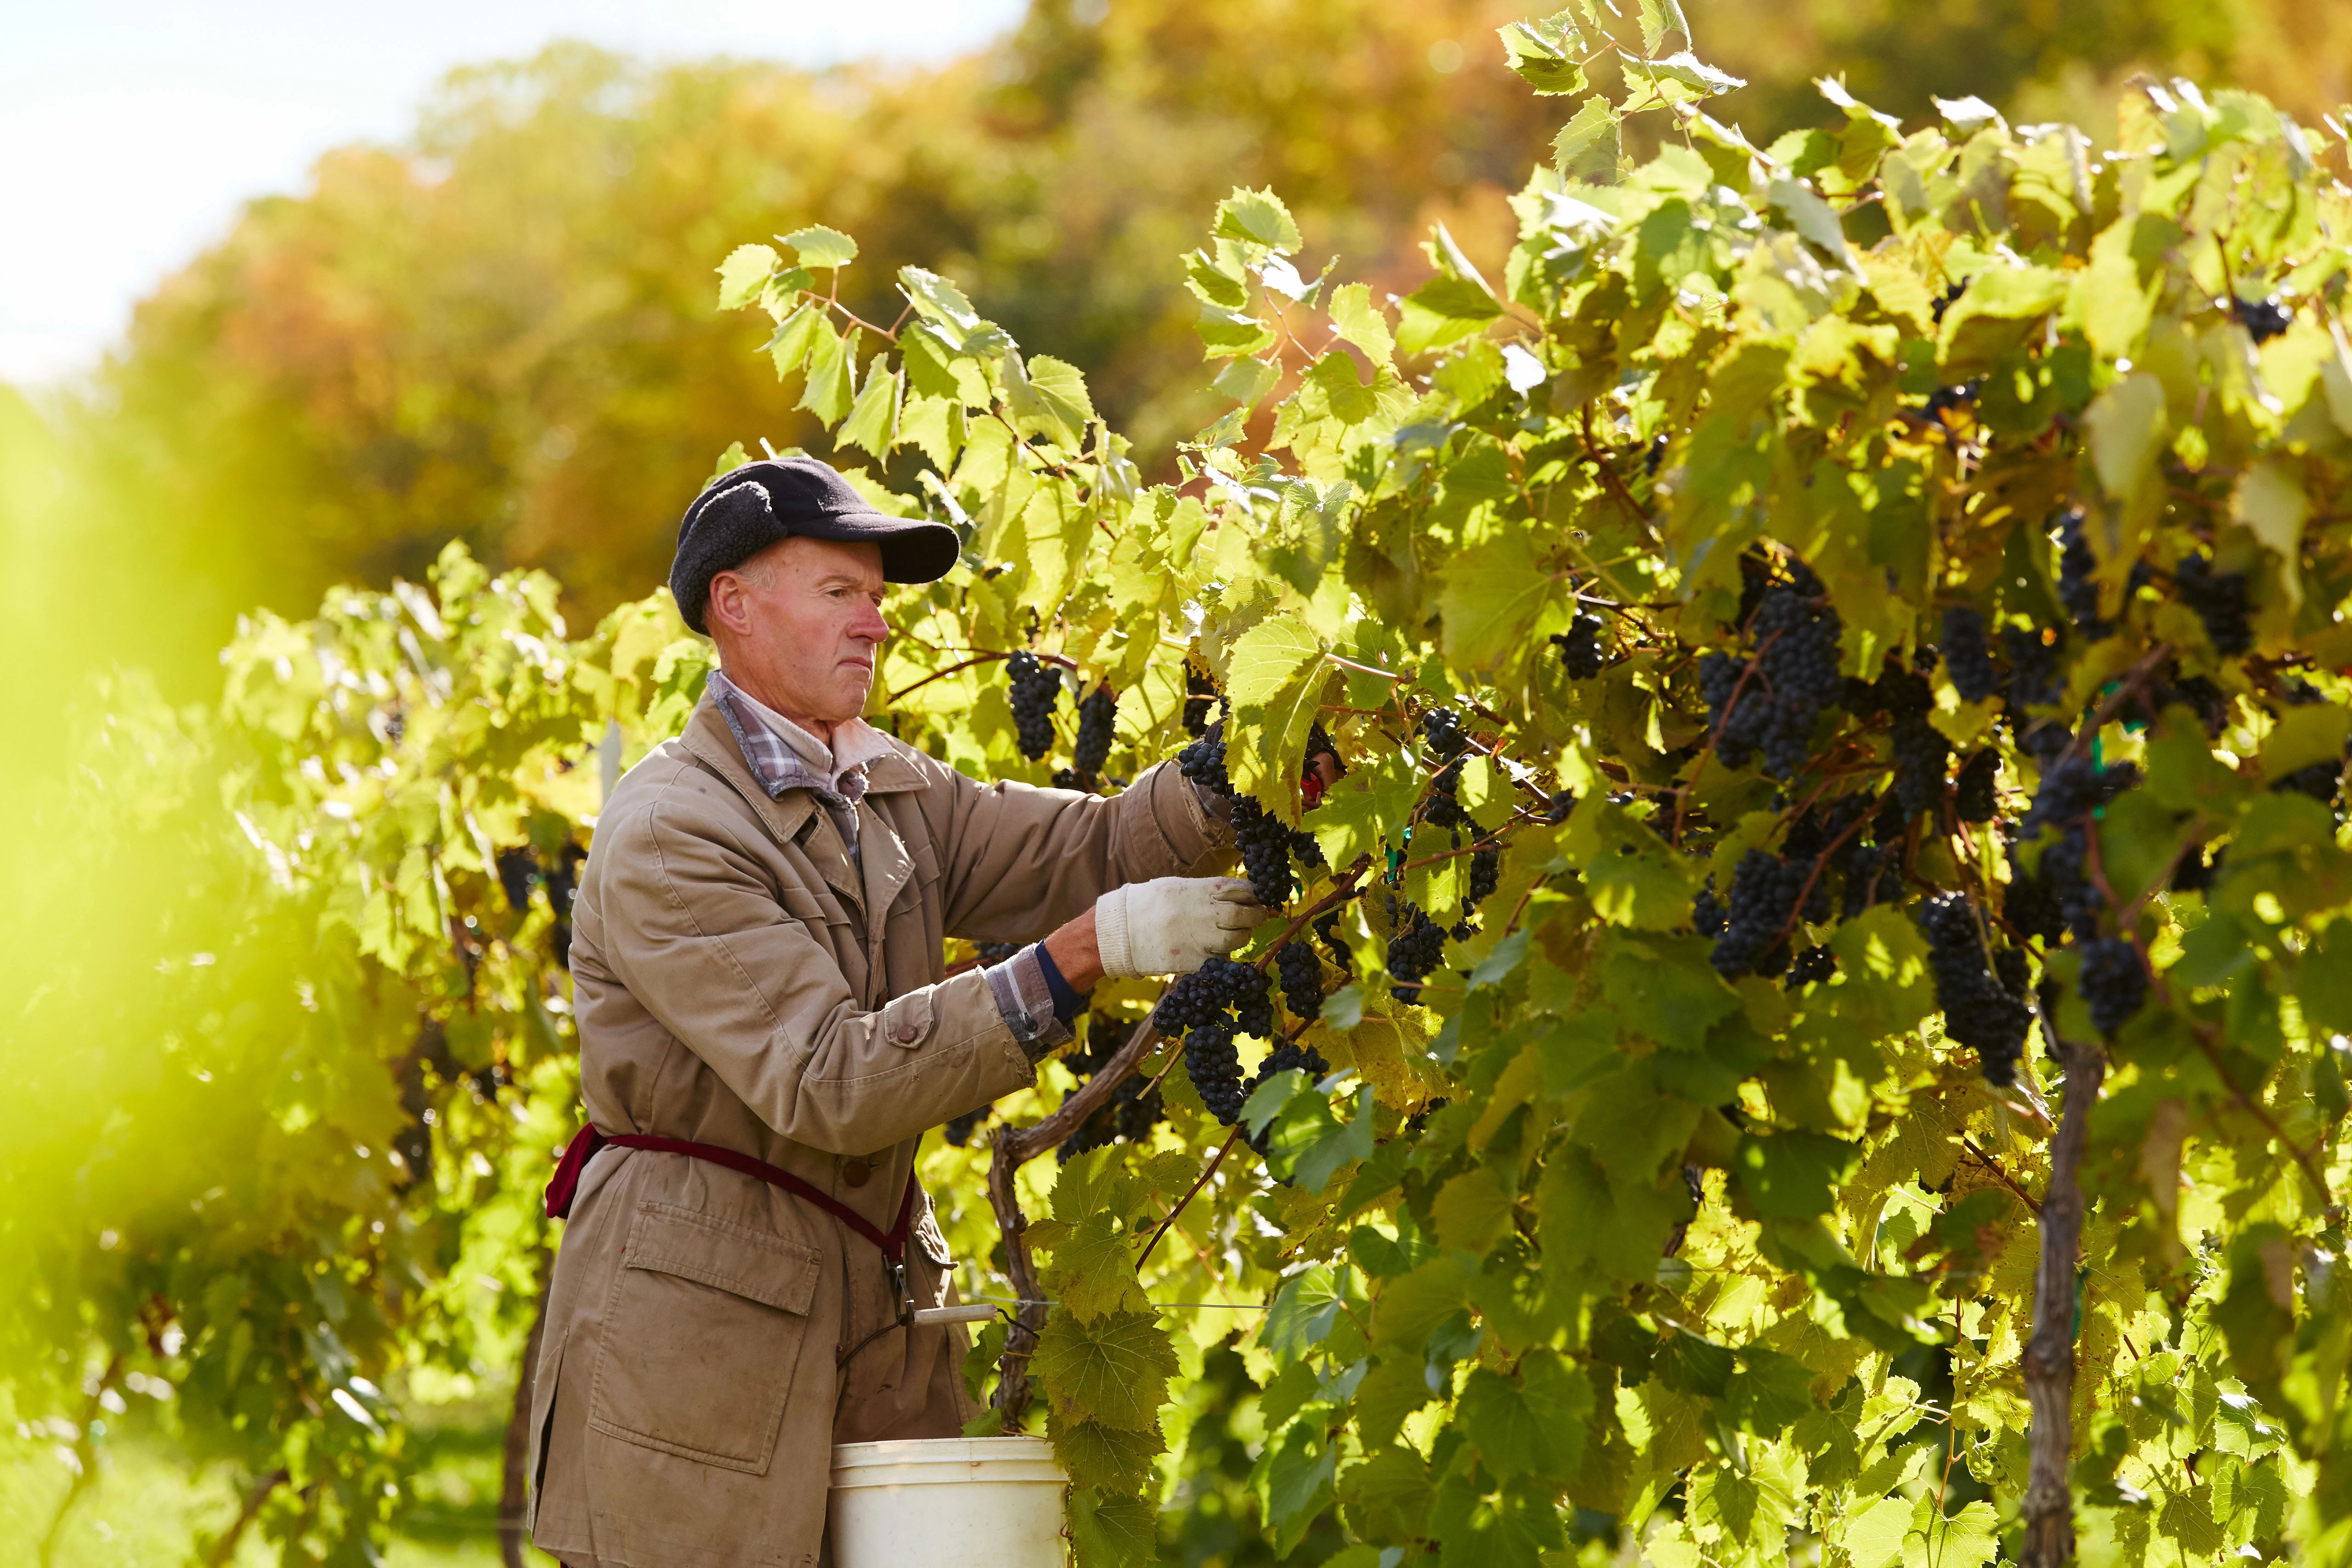 The best wineries in Door County, a man harvesting grapes at Lautenbach's Orchard Country in Fish Creek.